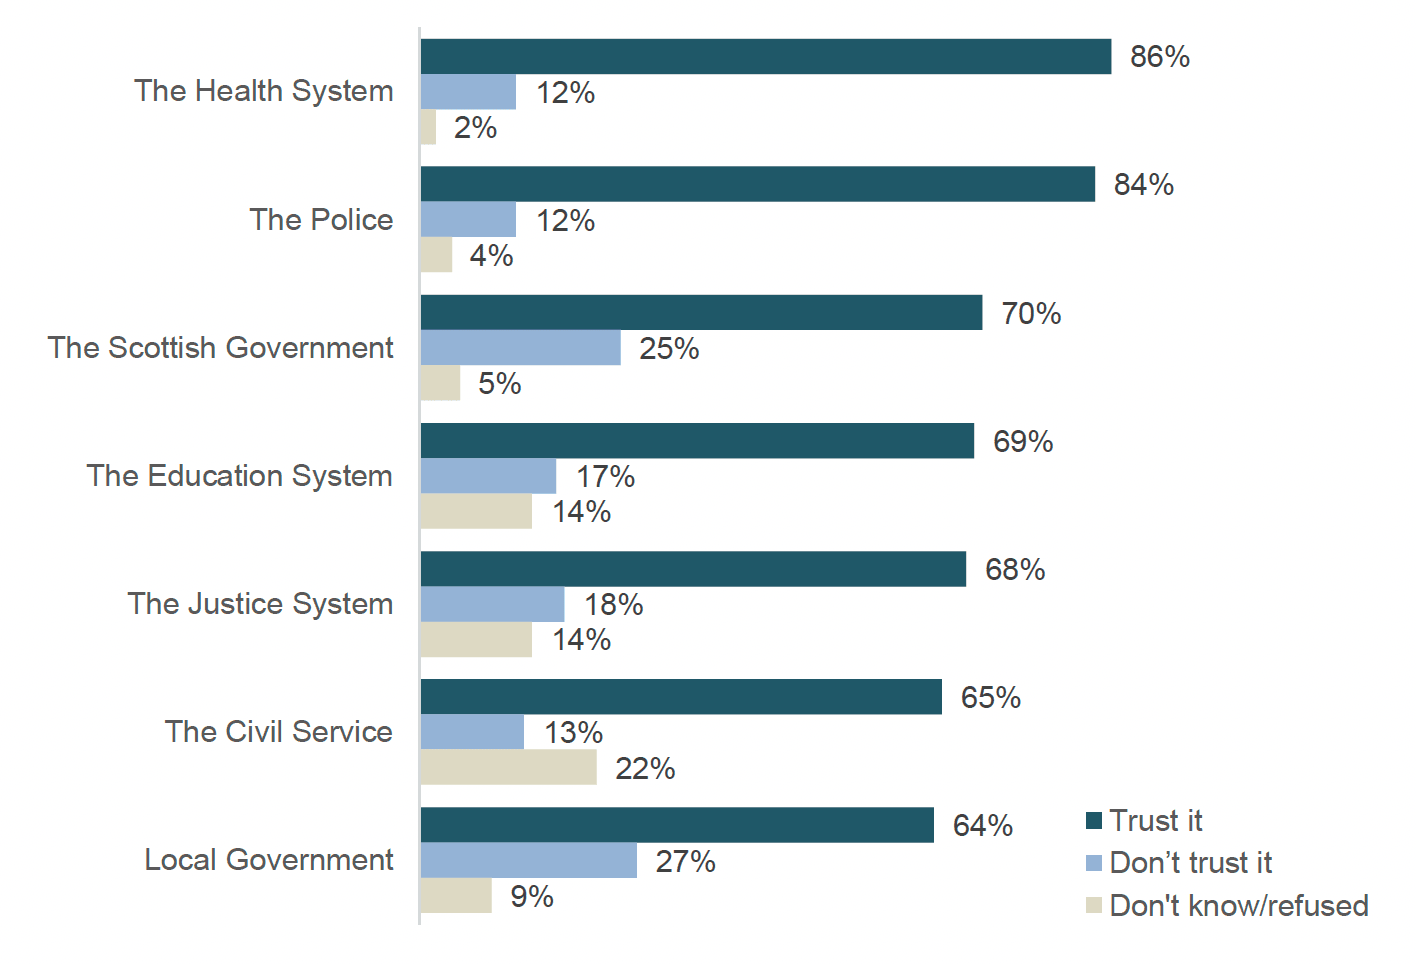 Bar chart showing levels of people saying they trust, don't trust or don't know if the trust various public institutions. The health system is the most trusted and local government the least.